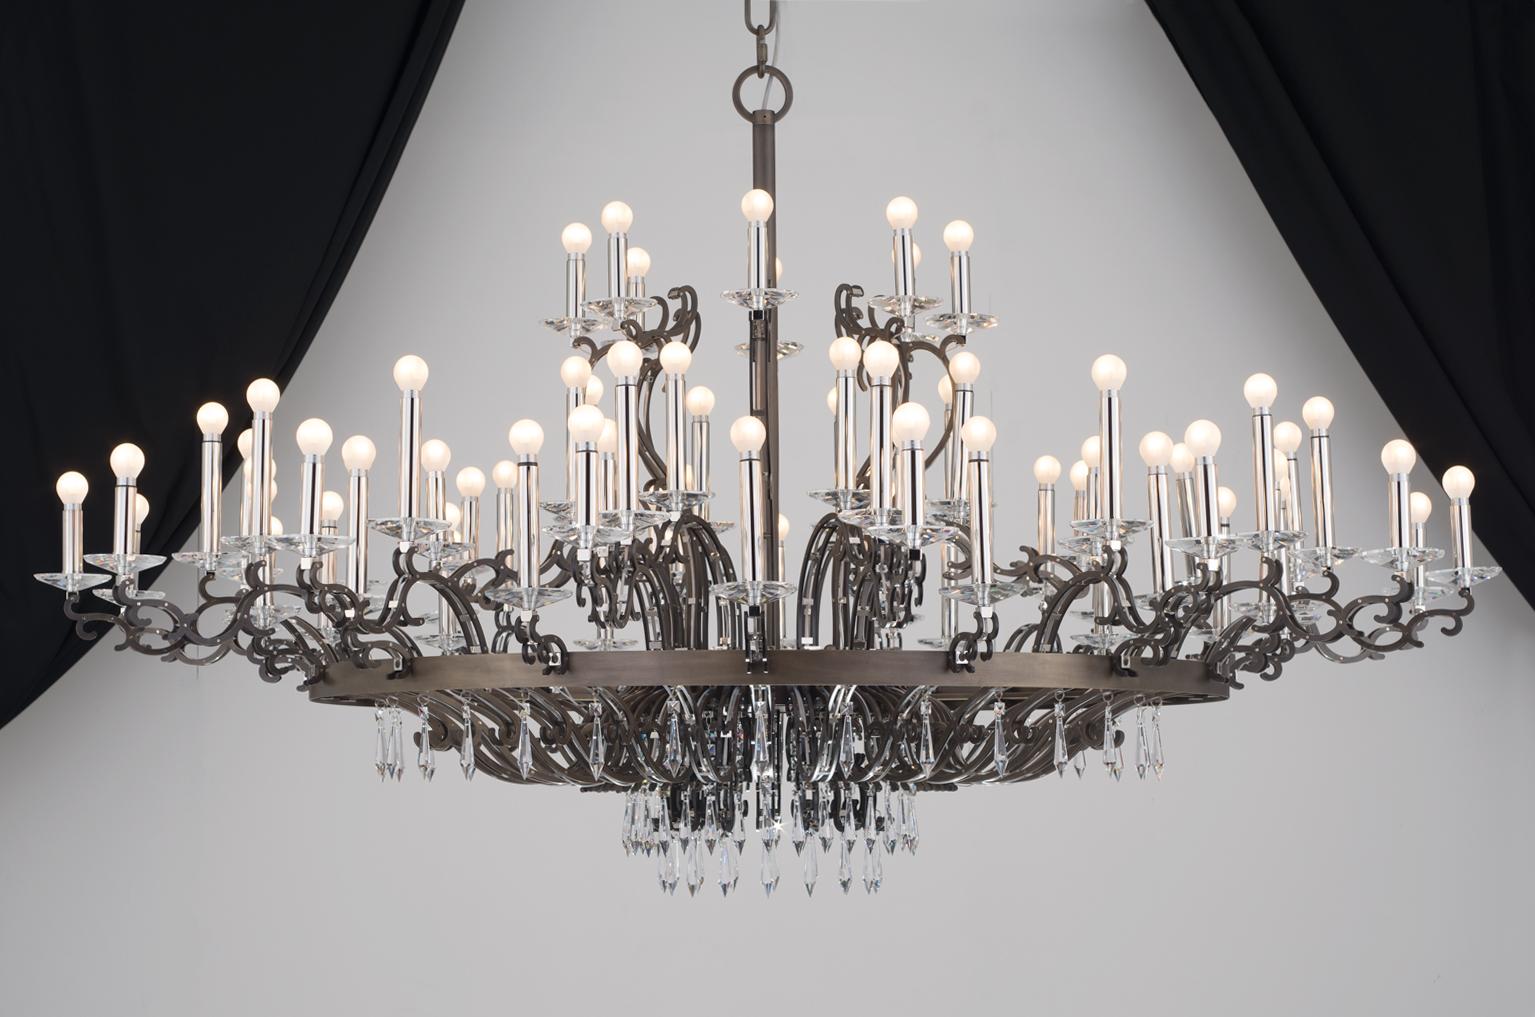 This model is a chandelier full of personality and attitude. Just like Morgan Le Fay who was a powerful feminine figure in celtic mythology, her main feature is the elegant and solid metallic structure, characterised by curves that chase each other